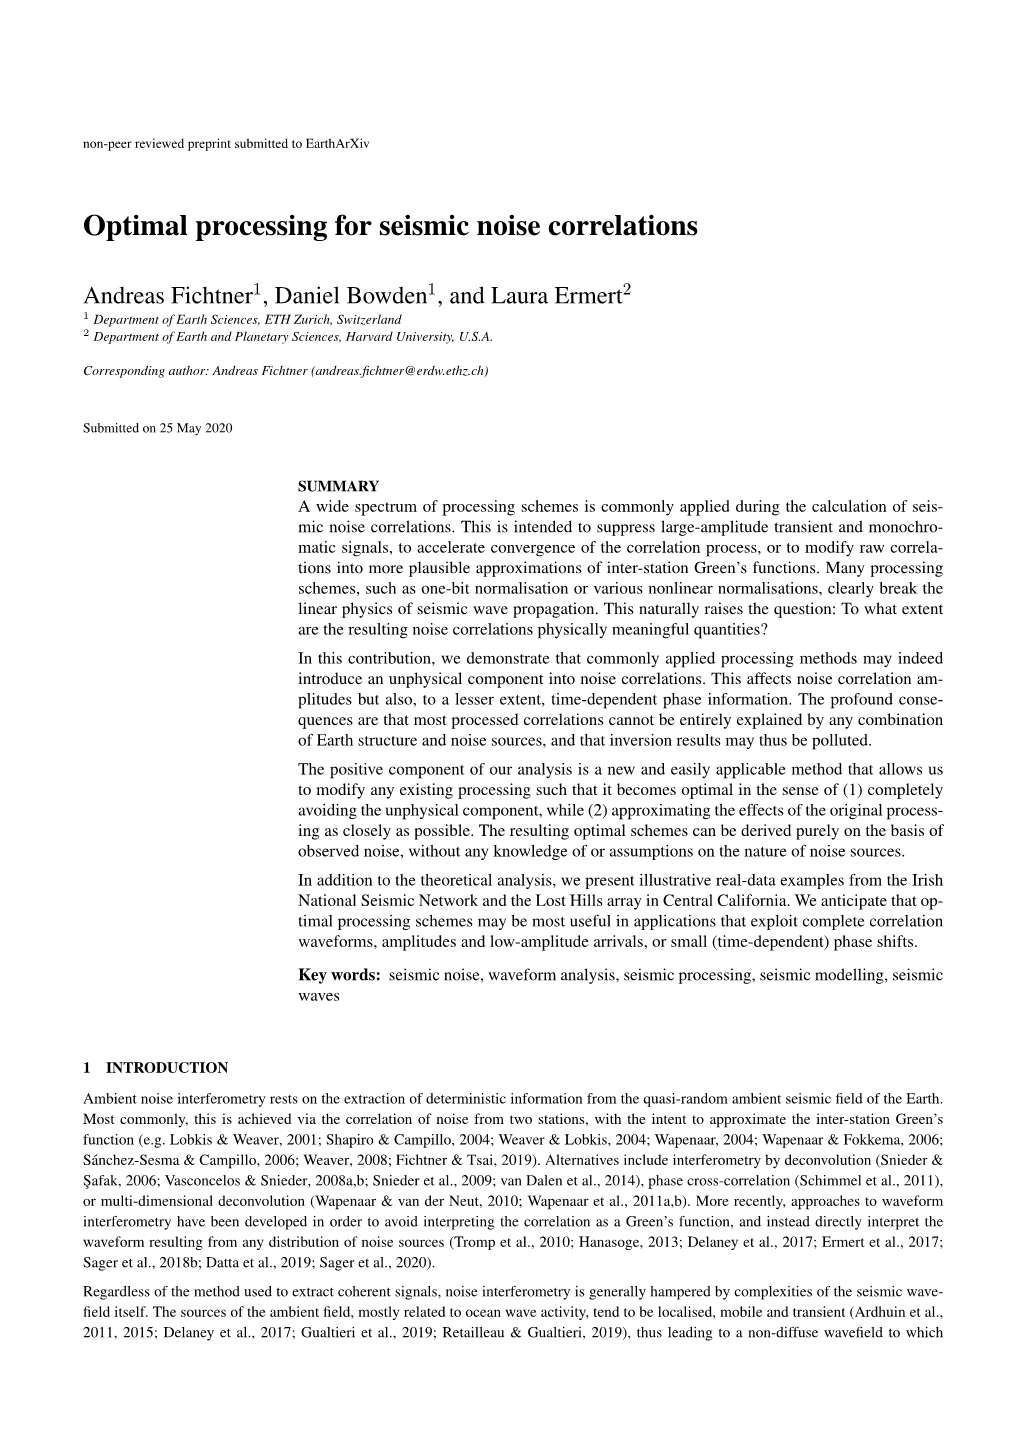 Optimal Processing for Seismic Noise Correlations